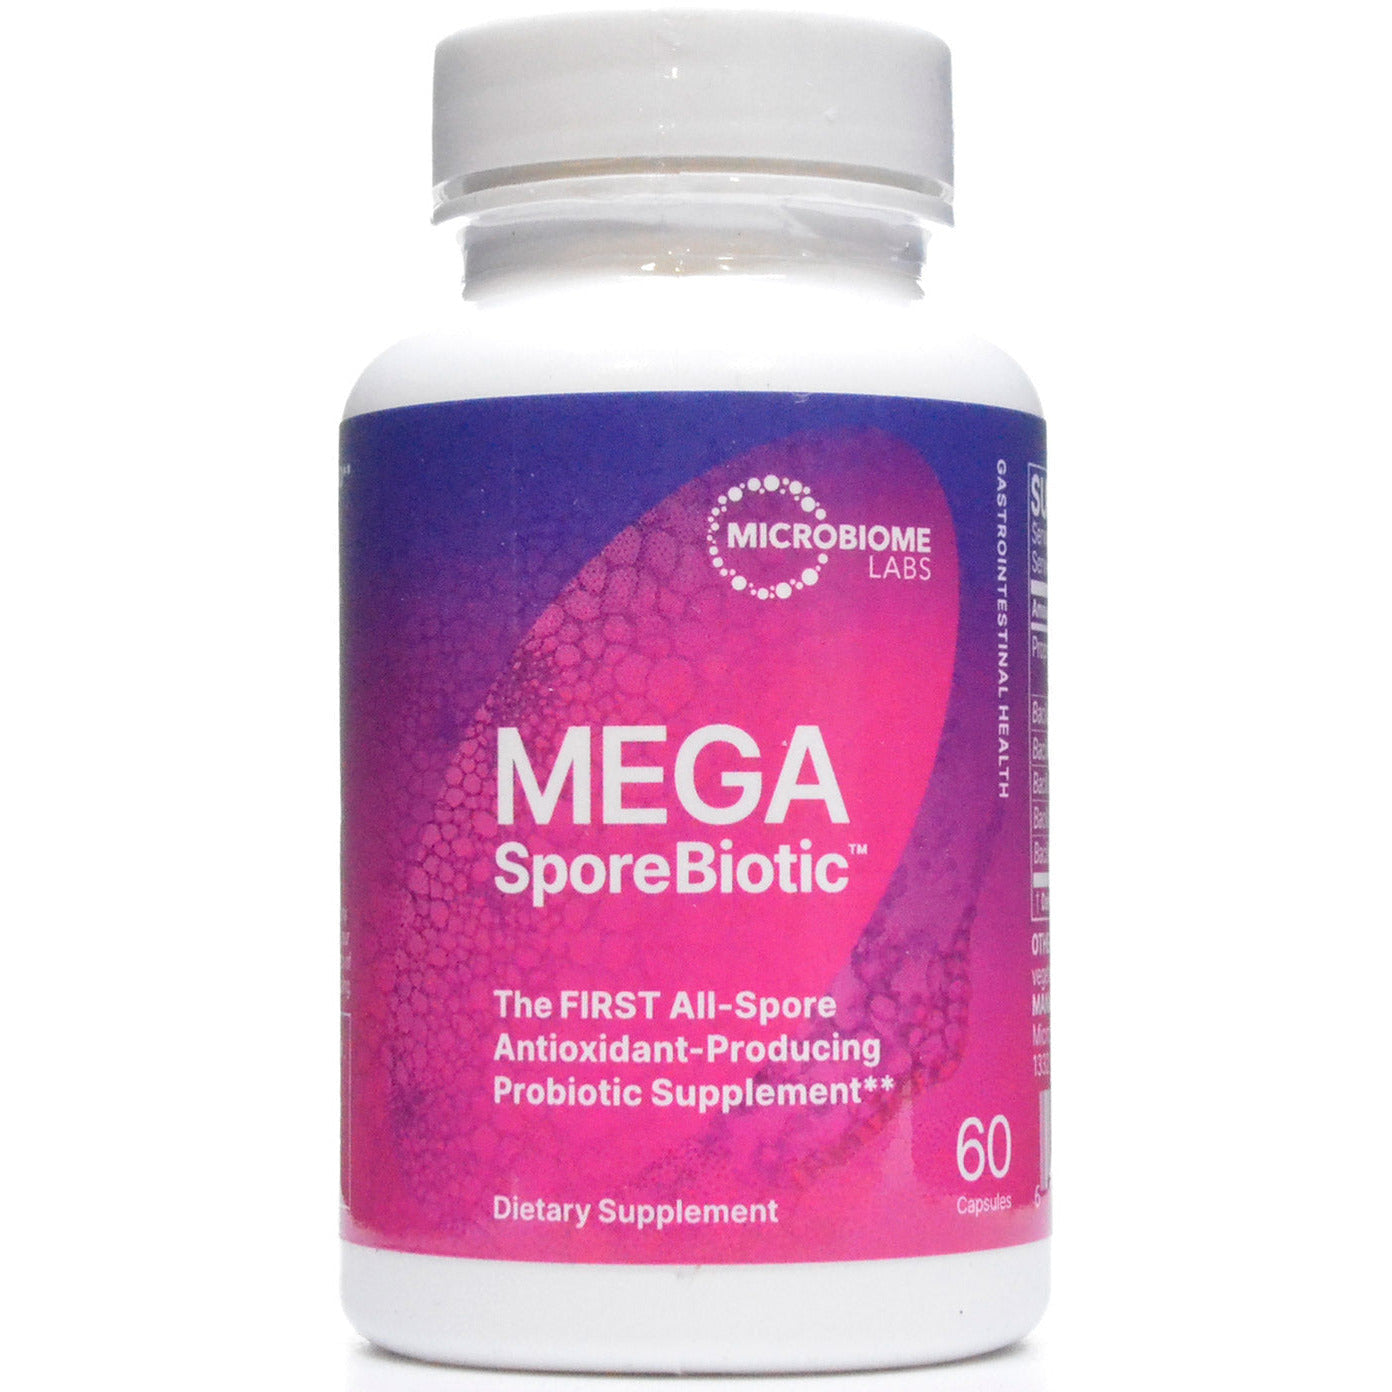 Image of MegaSporeBiotic by Microbiome Labs